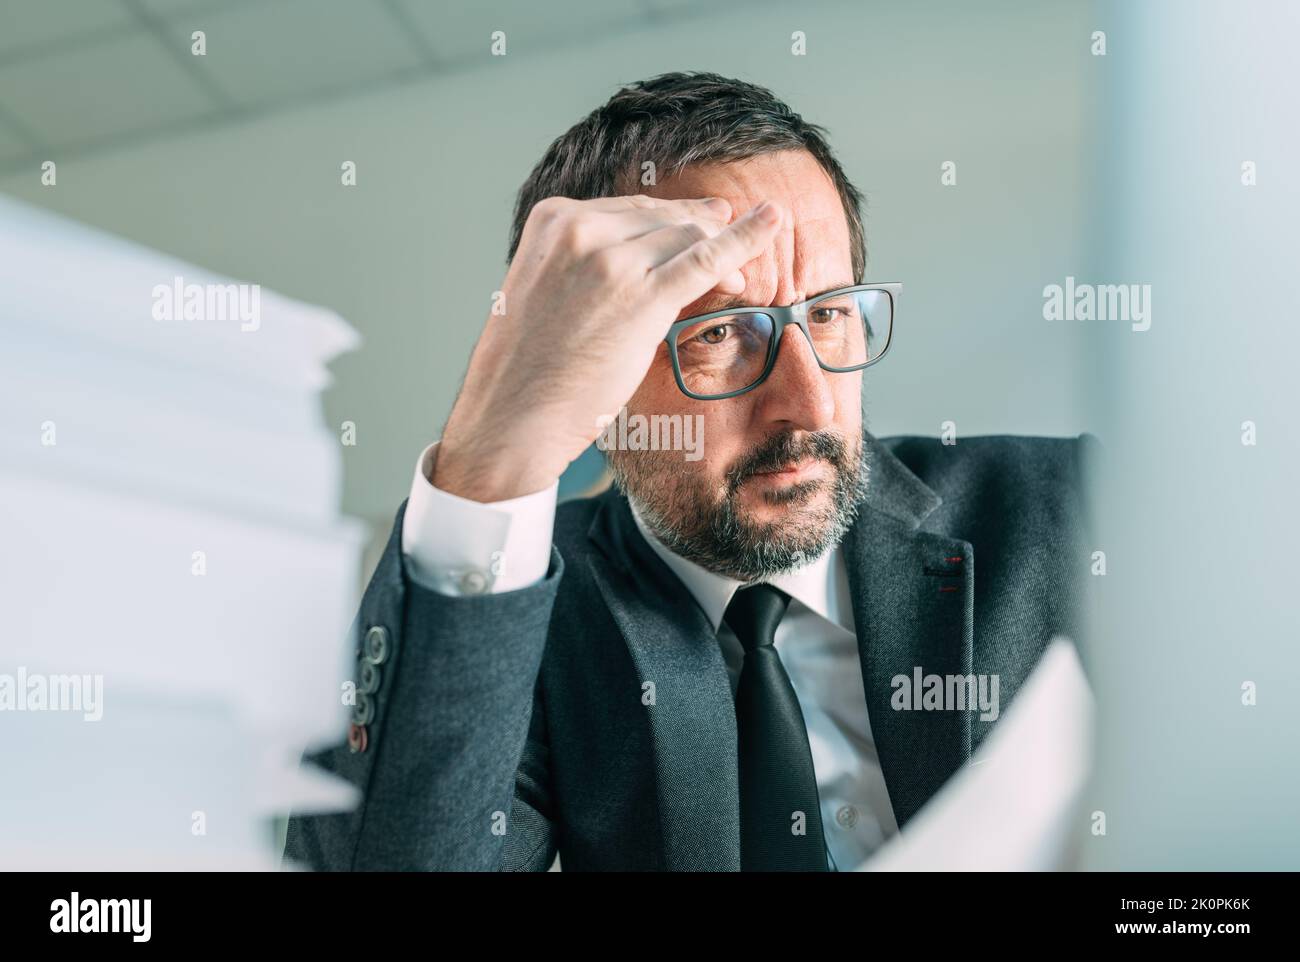 Serious business situation causing headache in office life, worried businessman looking at laptop screen and thinking, selective focus Stock Photo